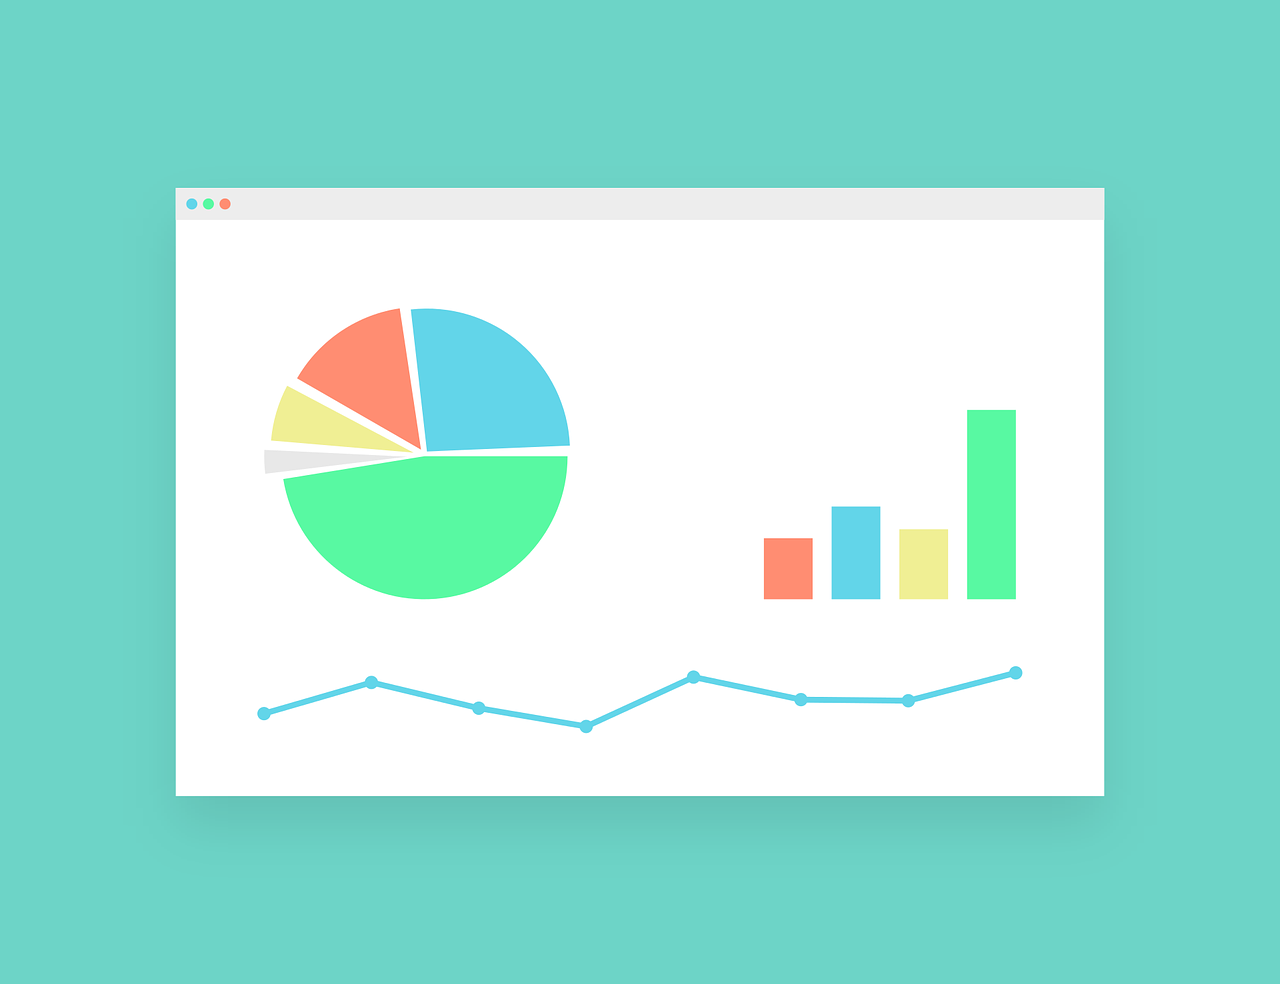 3 Reasons to Use Data Visualization in Your Next Marketing Meeting